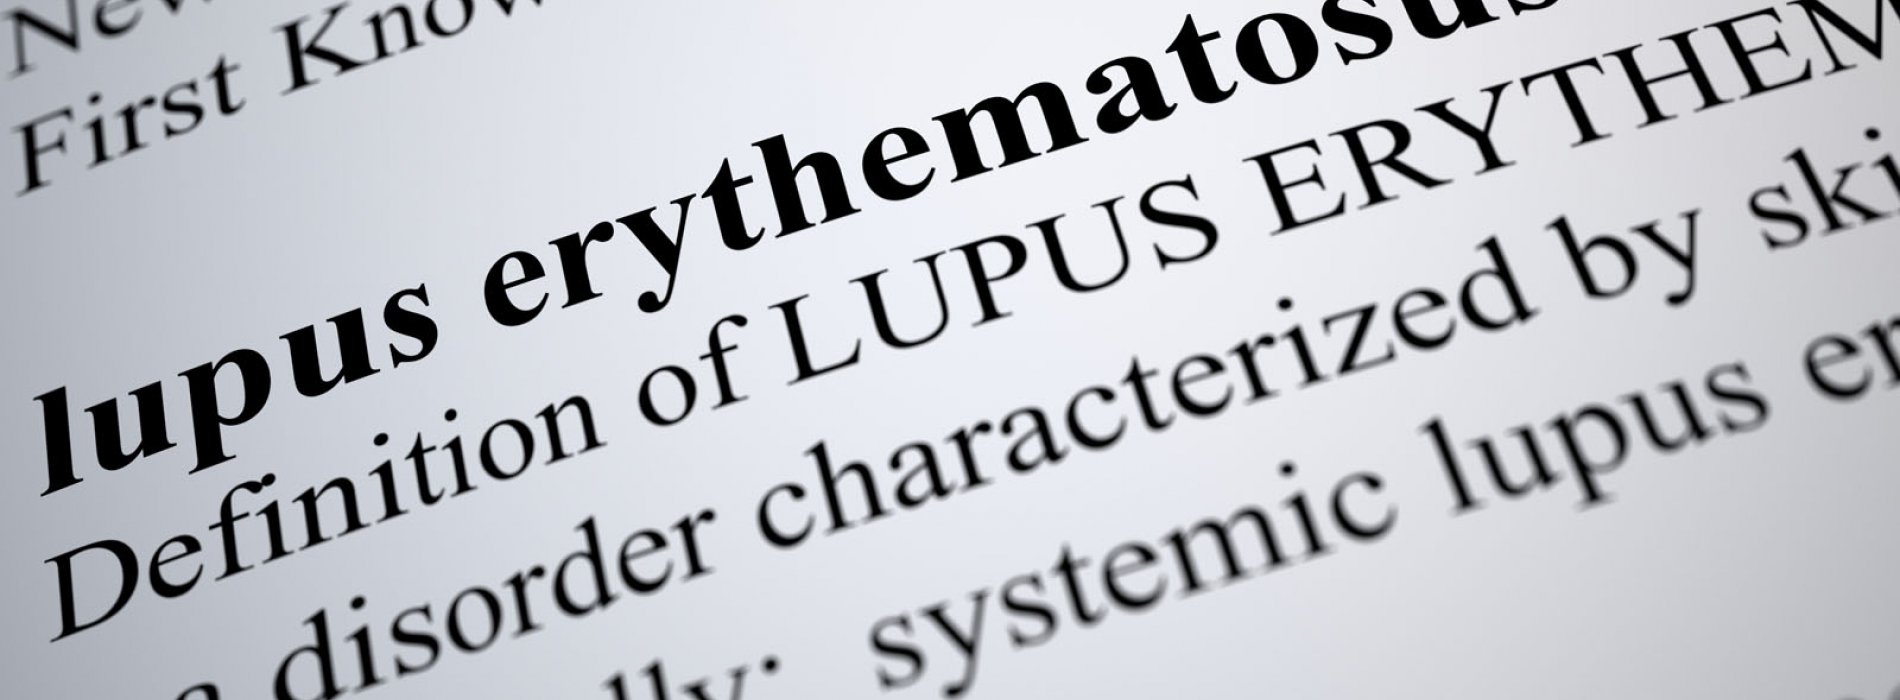 Lupus meaning